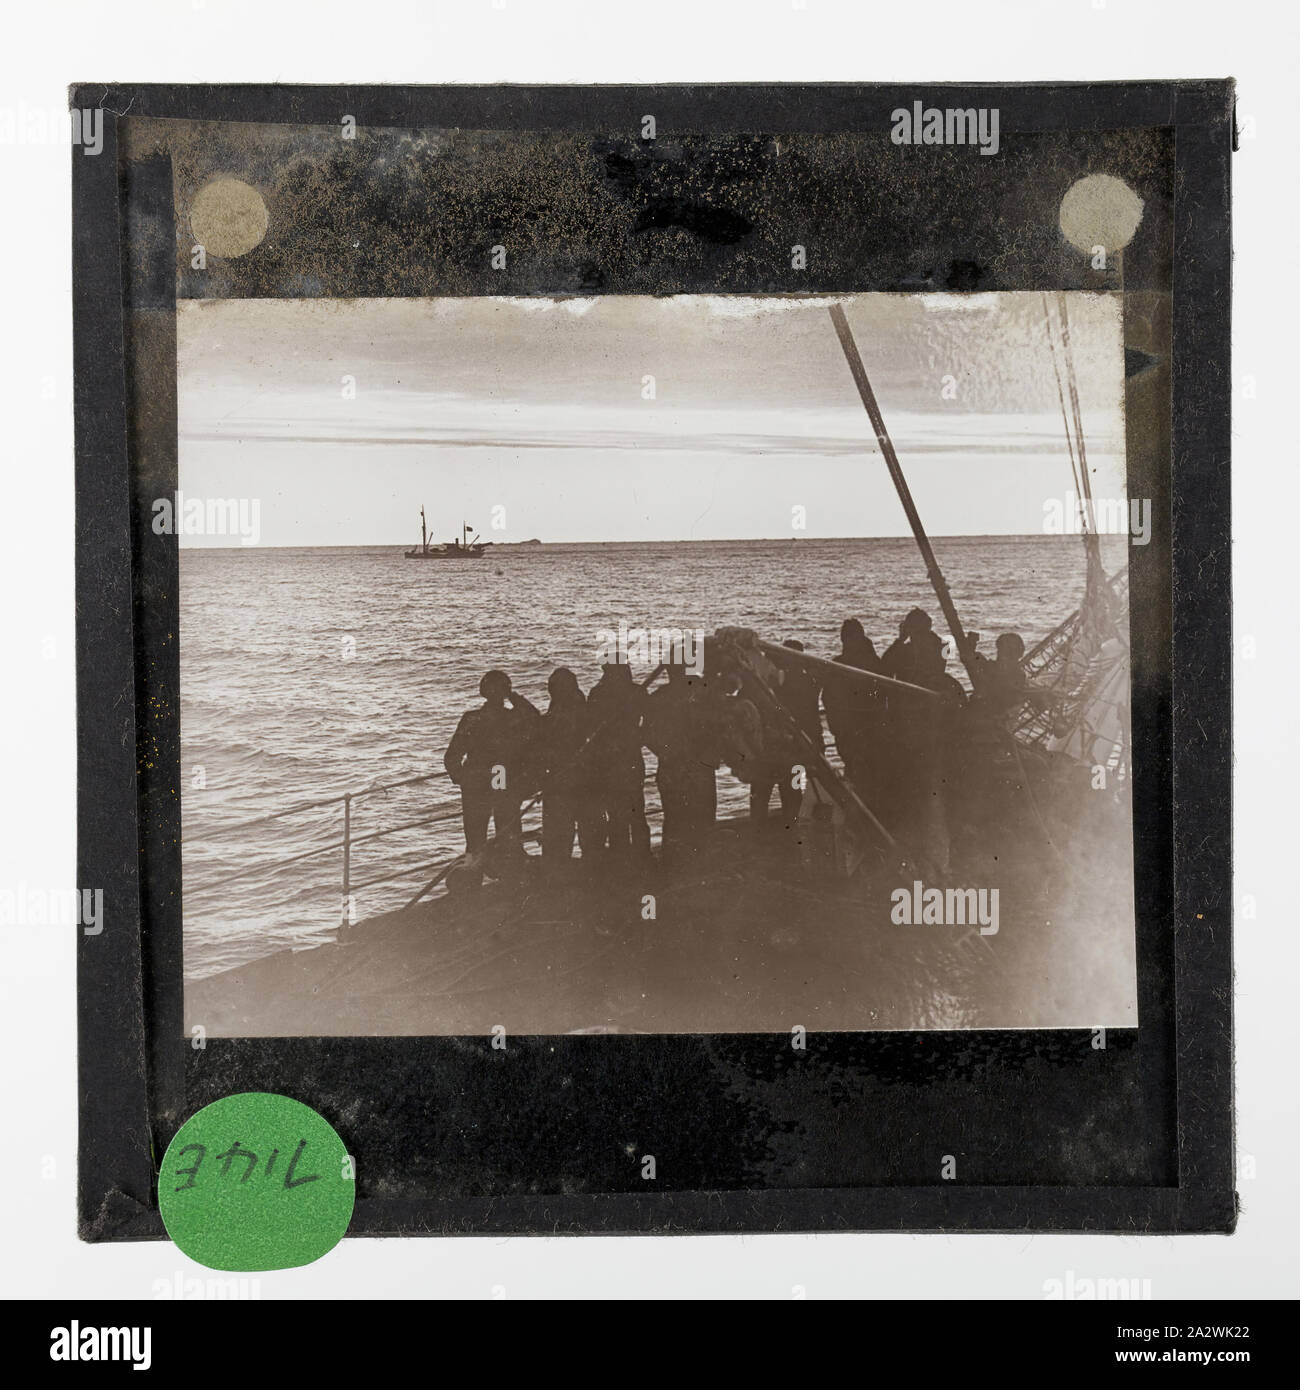 Lantern Slide - The Ships Discovery & Norvegia Meeting Up, BANZARE Voyage 1, Antarctica, 14 Jan 1930, Lantern slide of the ships Discovery & Norvegia, Antarctica. One of 328 images in various formats including artworks, photographs, glass negatives and lantern slides Stock Photo